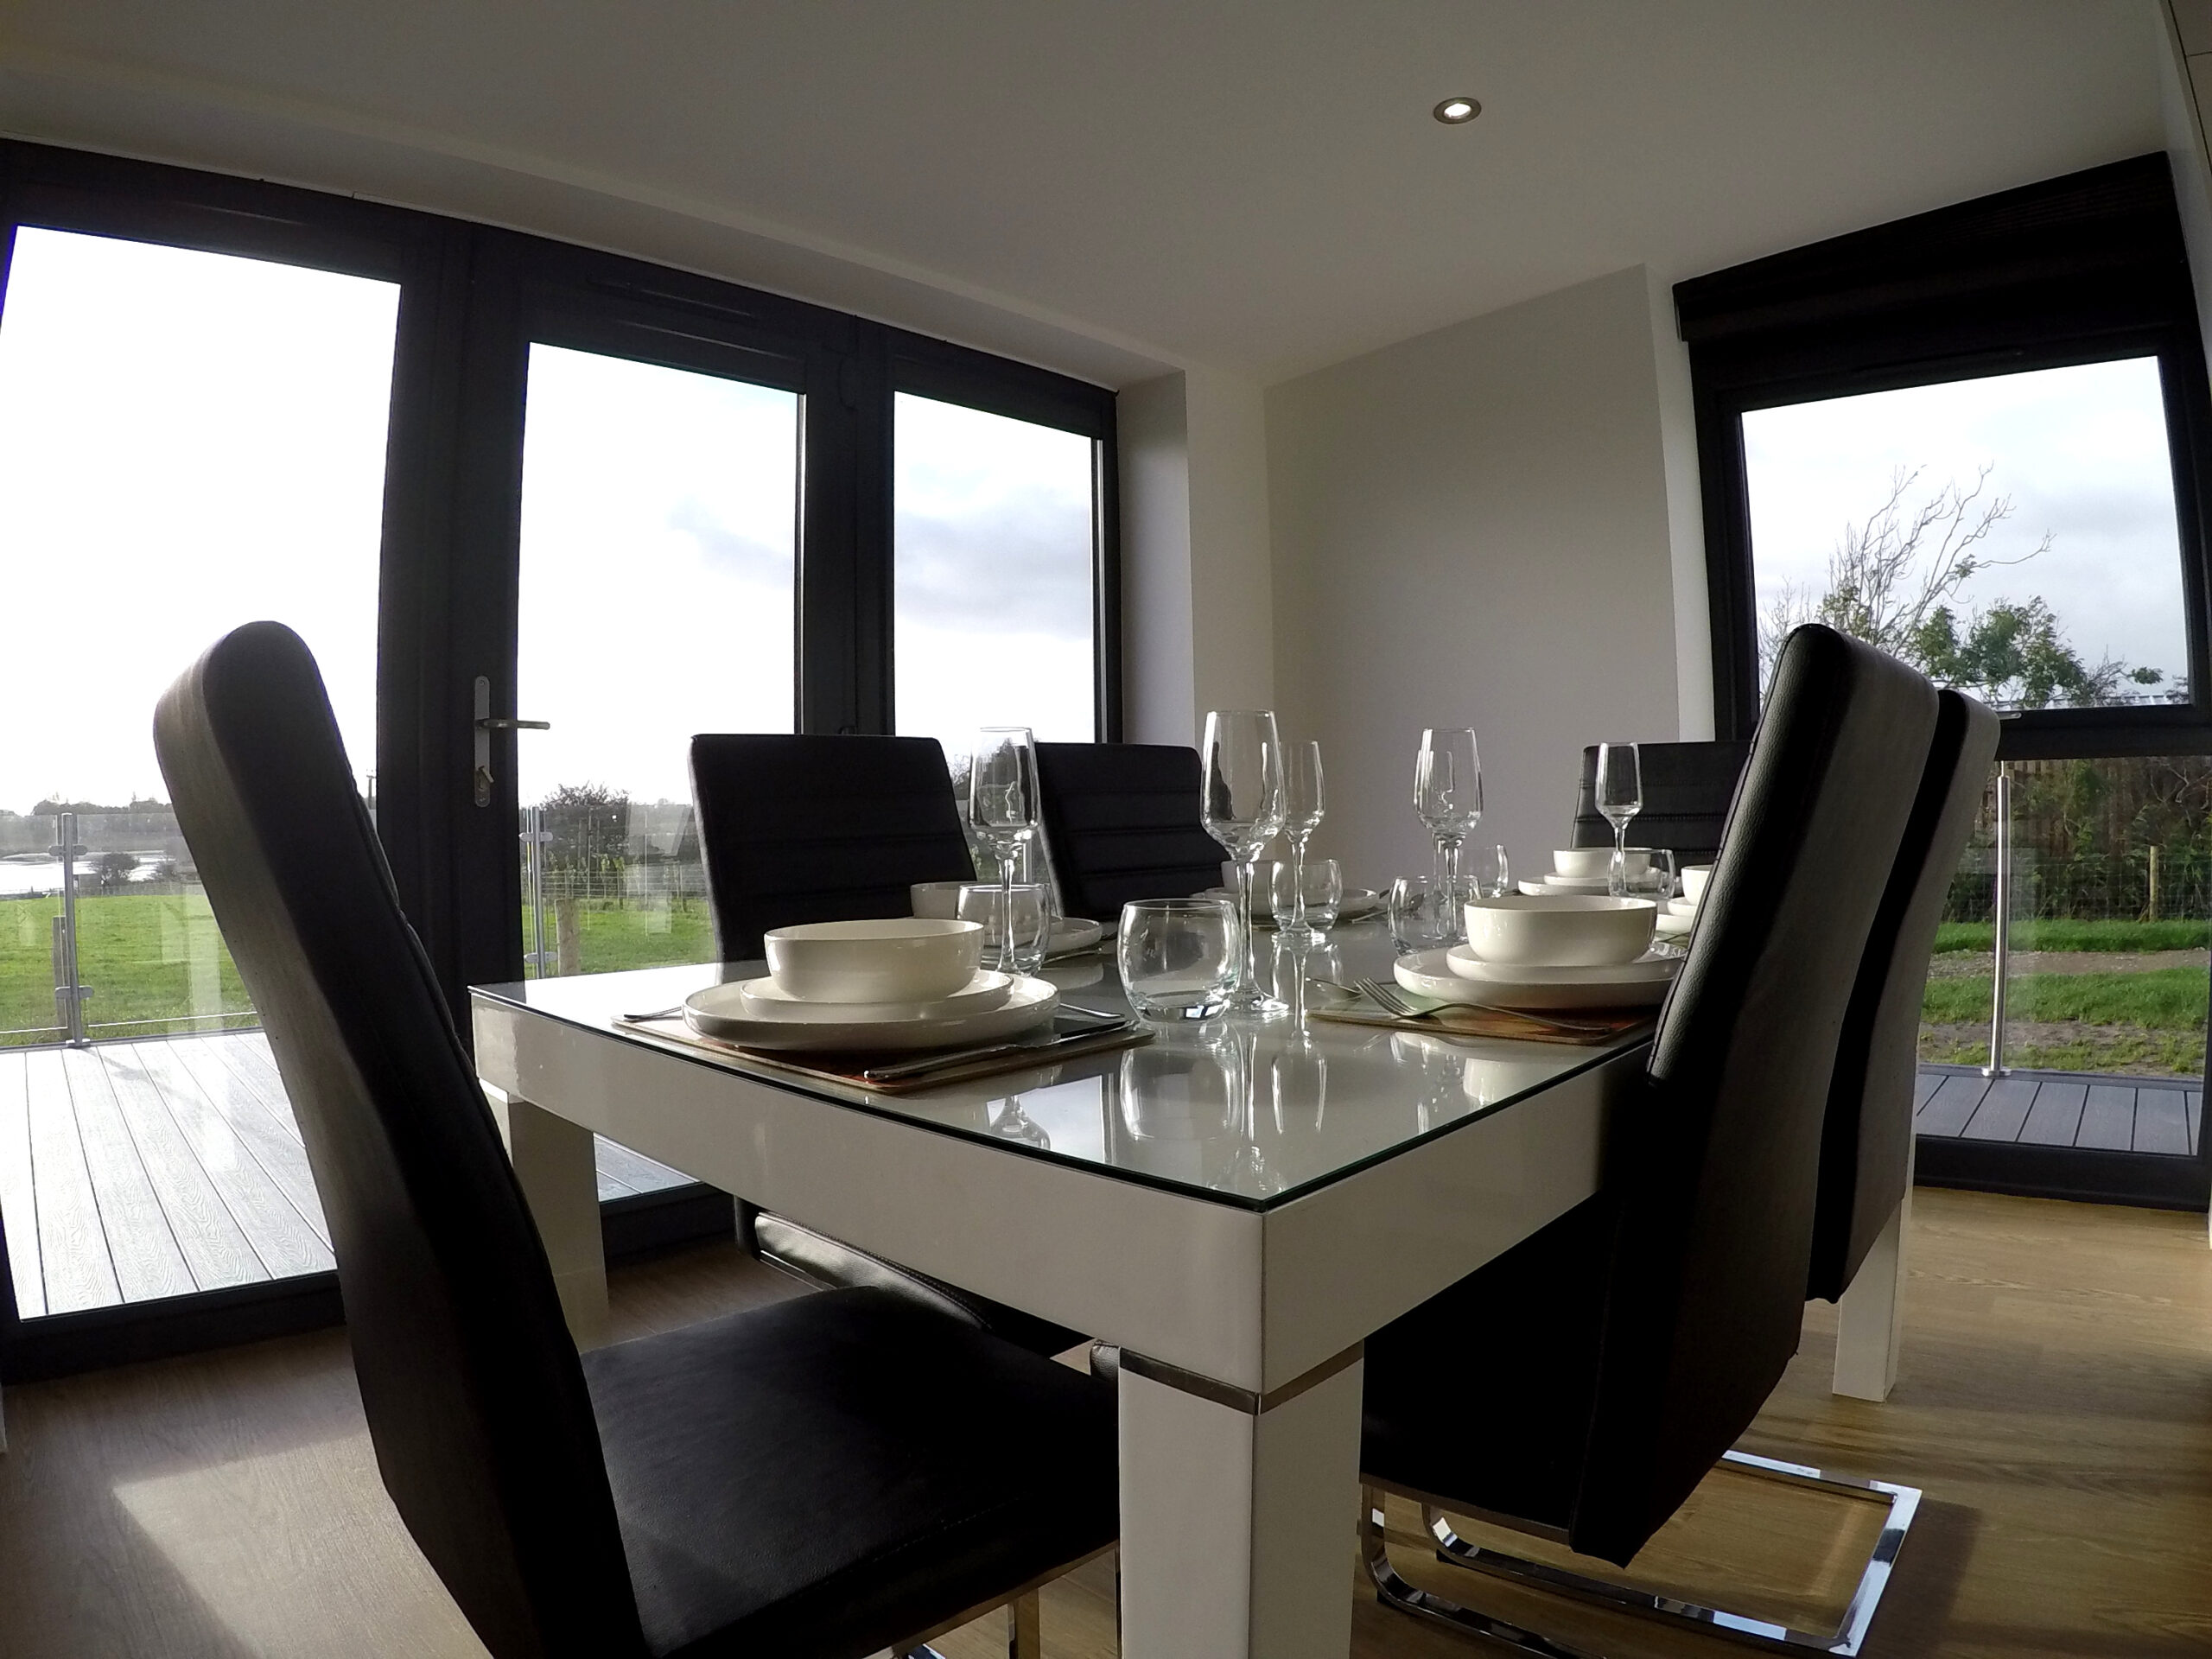 White dining table with glass top and black chairs. Table set for dinner with mats, plates and bowls and glassware. Decking views through the glass windows and door.